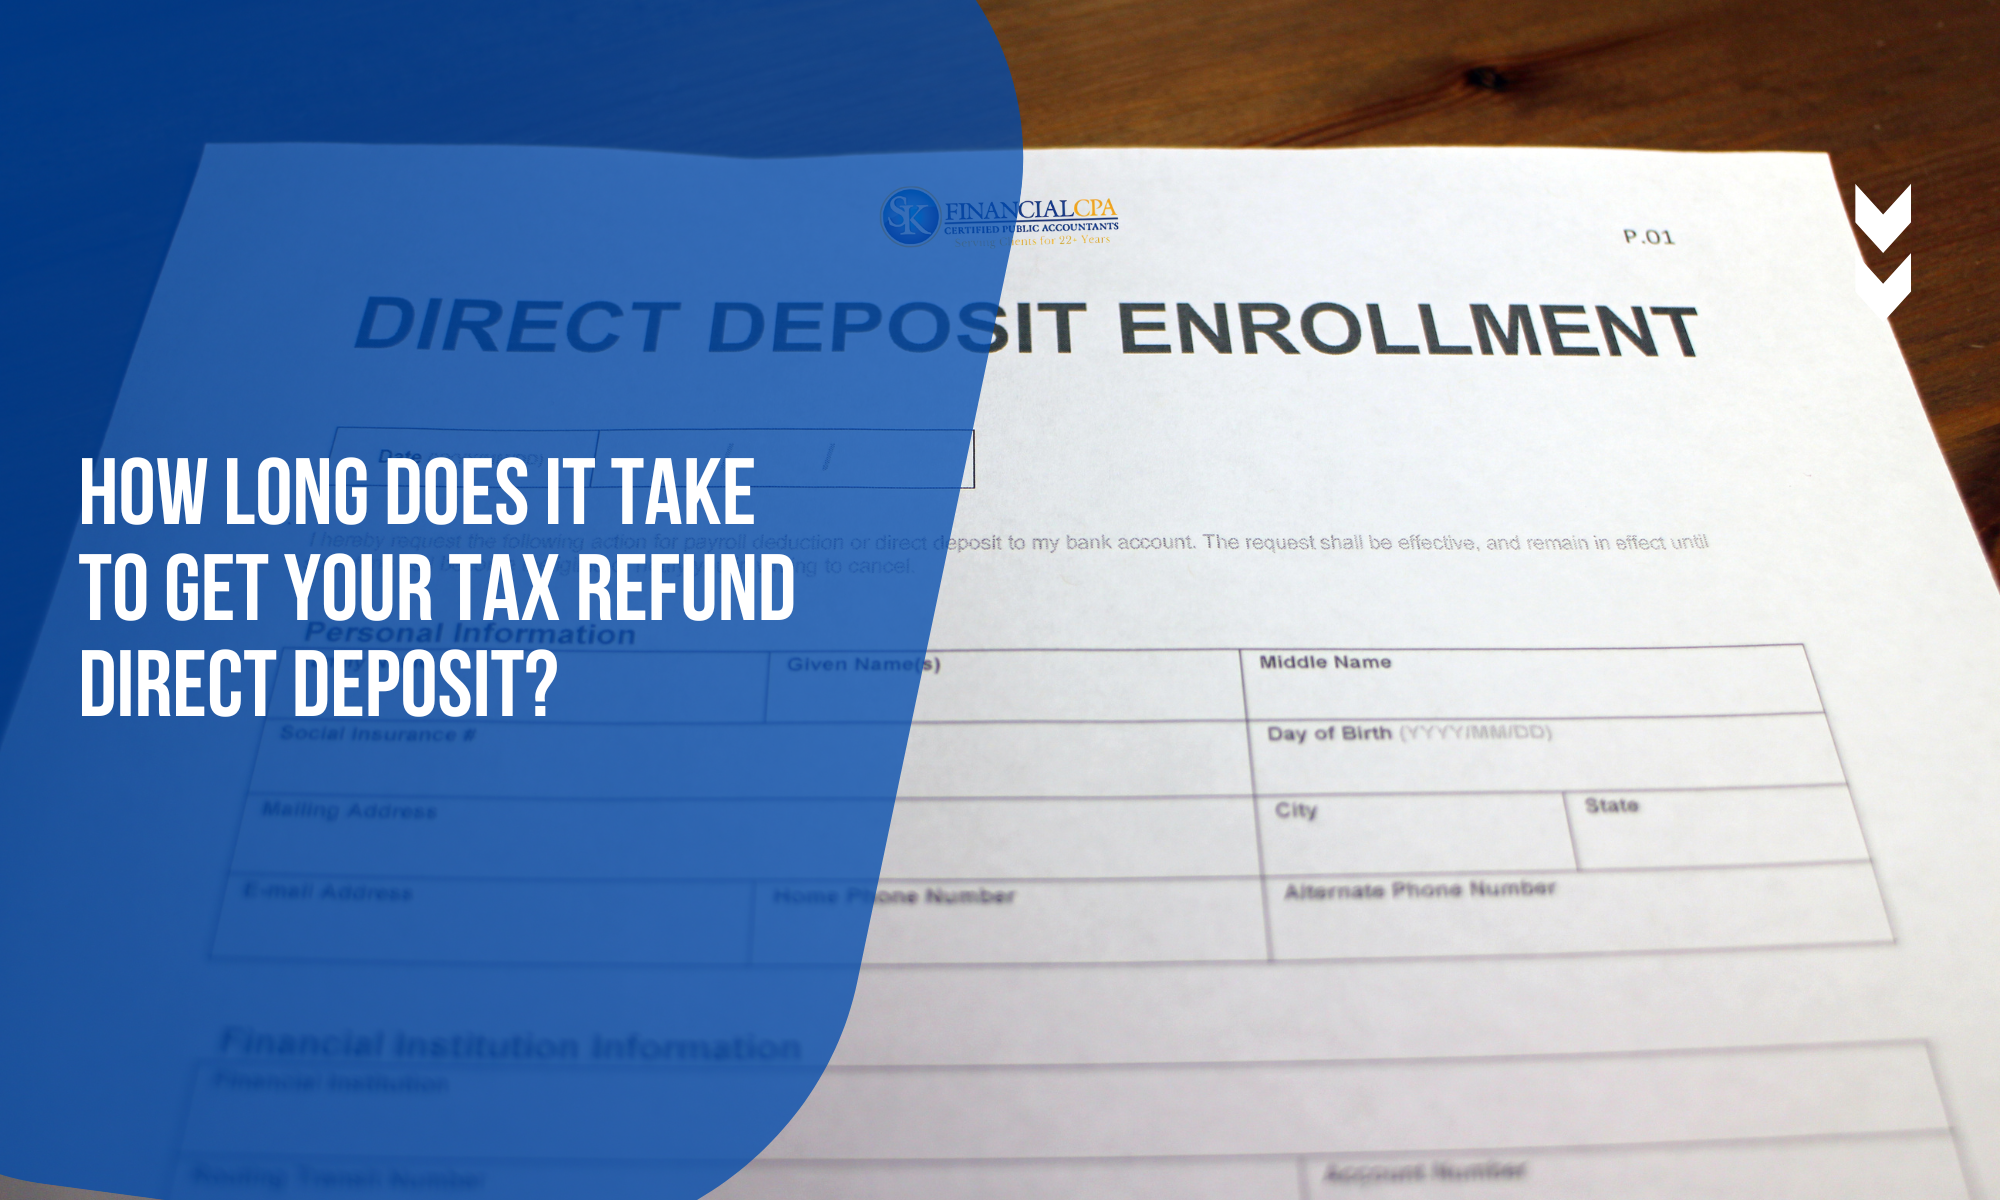 How long does it take to get your tax refund direct deposit?